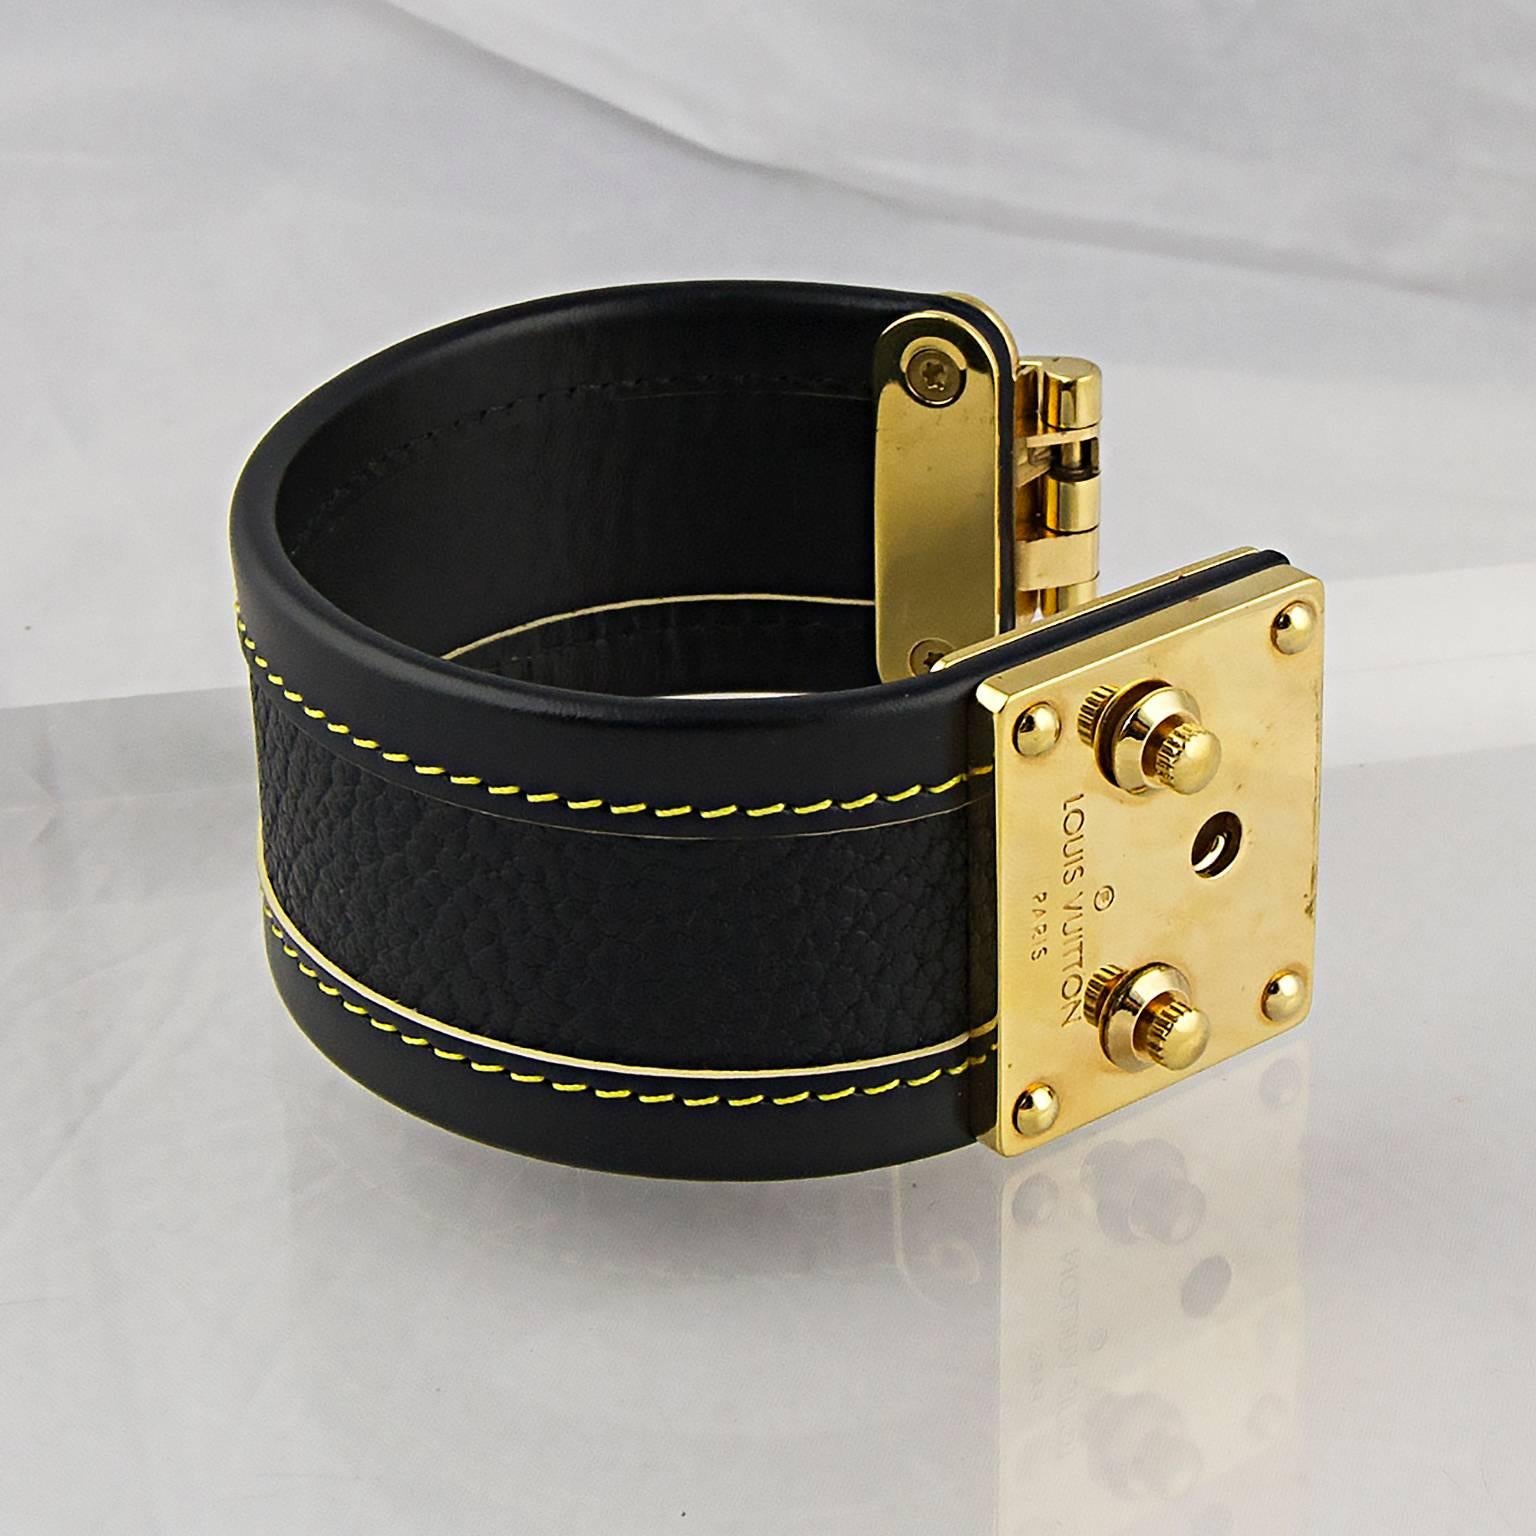 Louis Vuitton Suhali cuff with high carat gold plated detail.
A classic Vuitton leather accessory. 
Made in France in July 2007.
